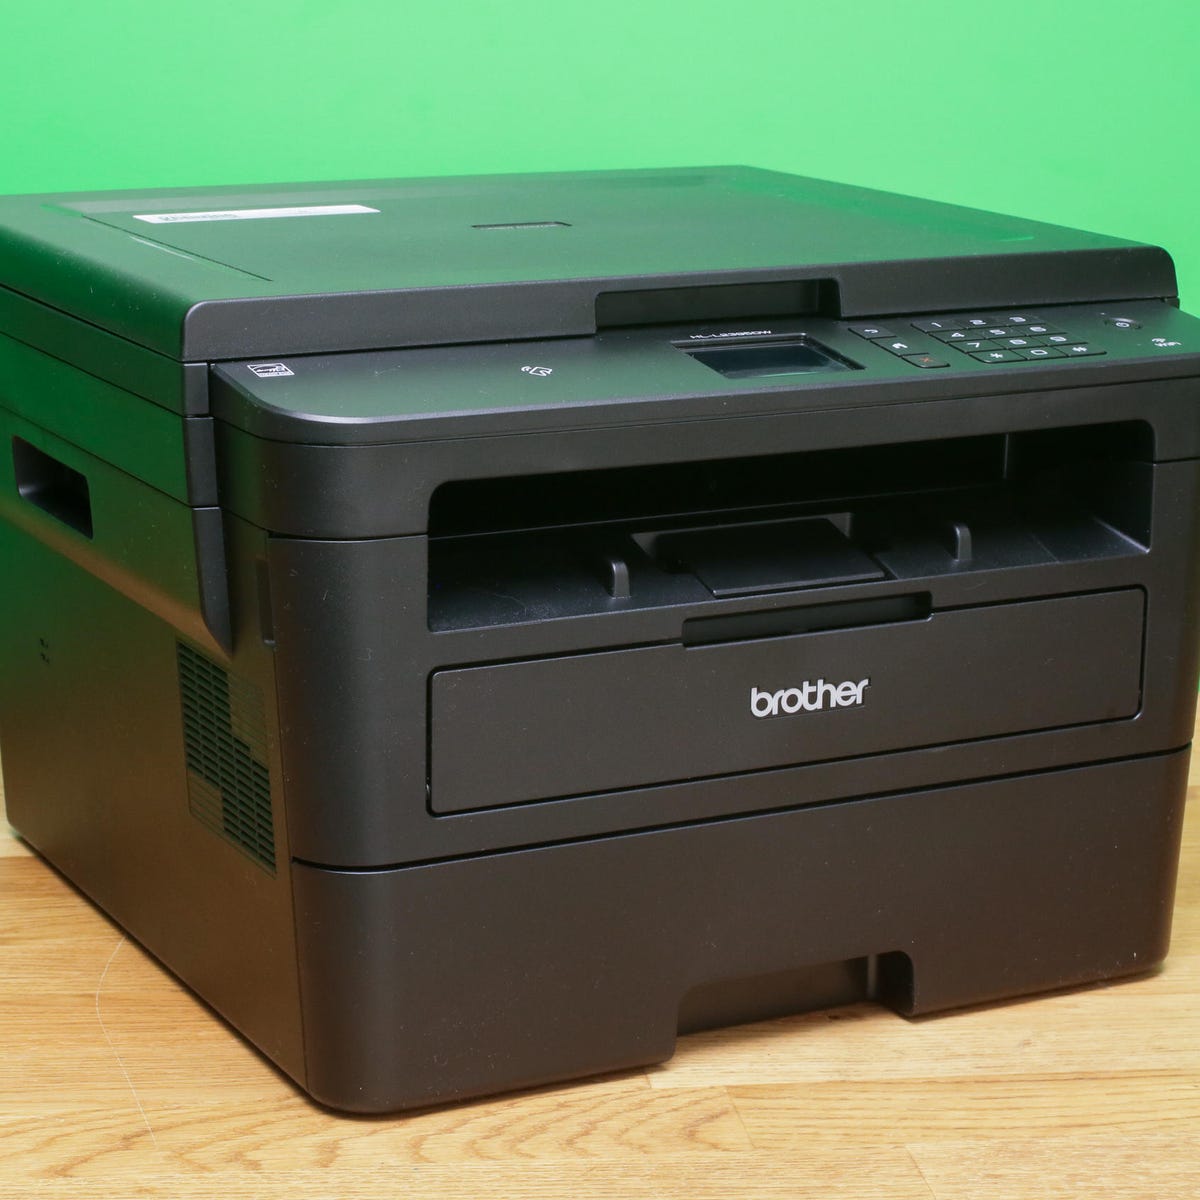 Brother HL-L2395DW review: I finally found an affordable printer I don't  hate - CNET